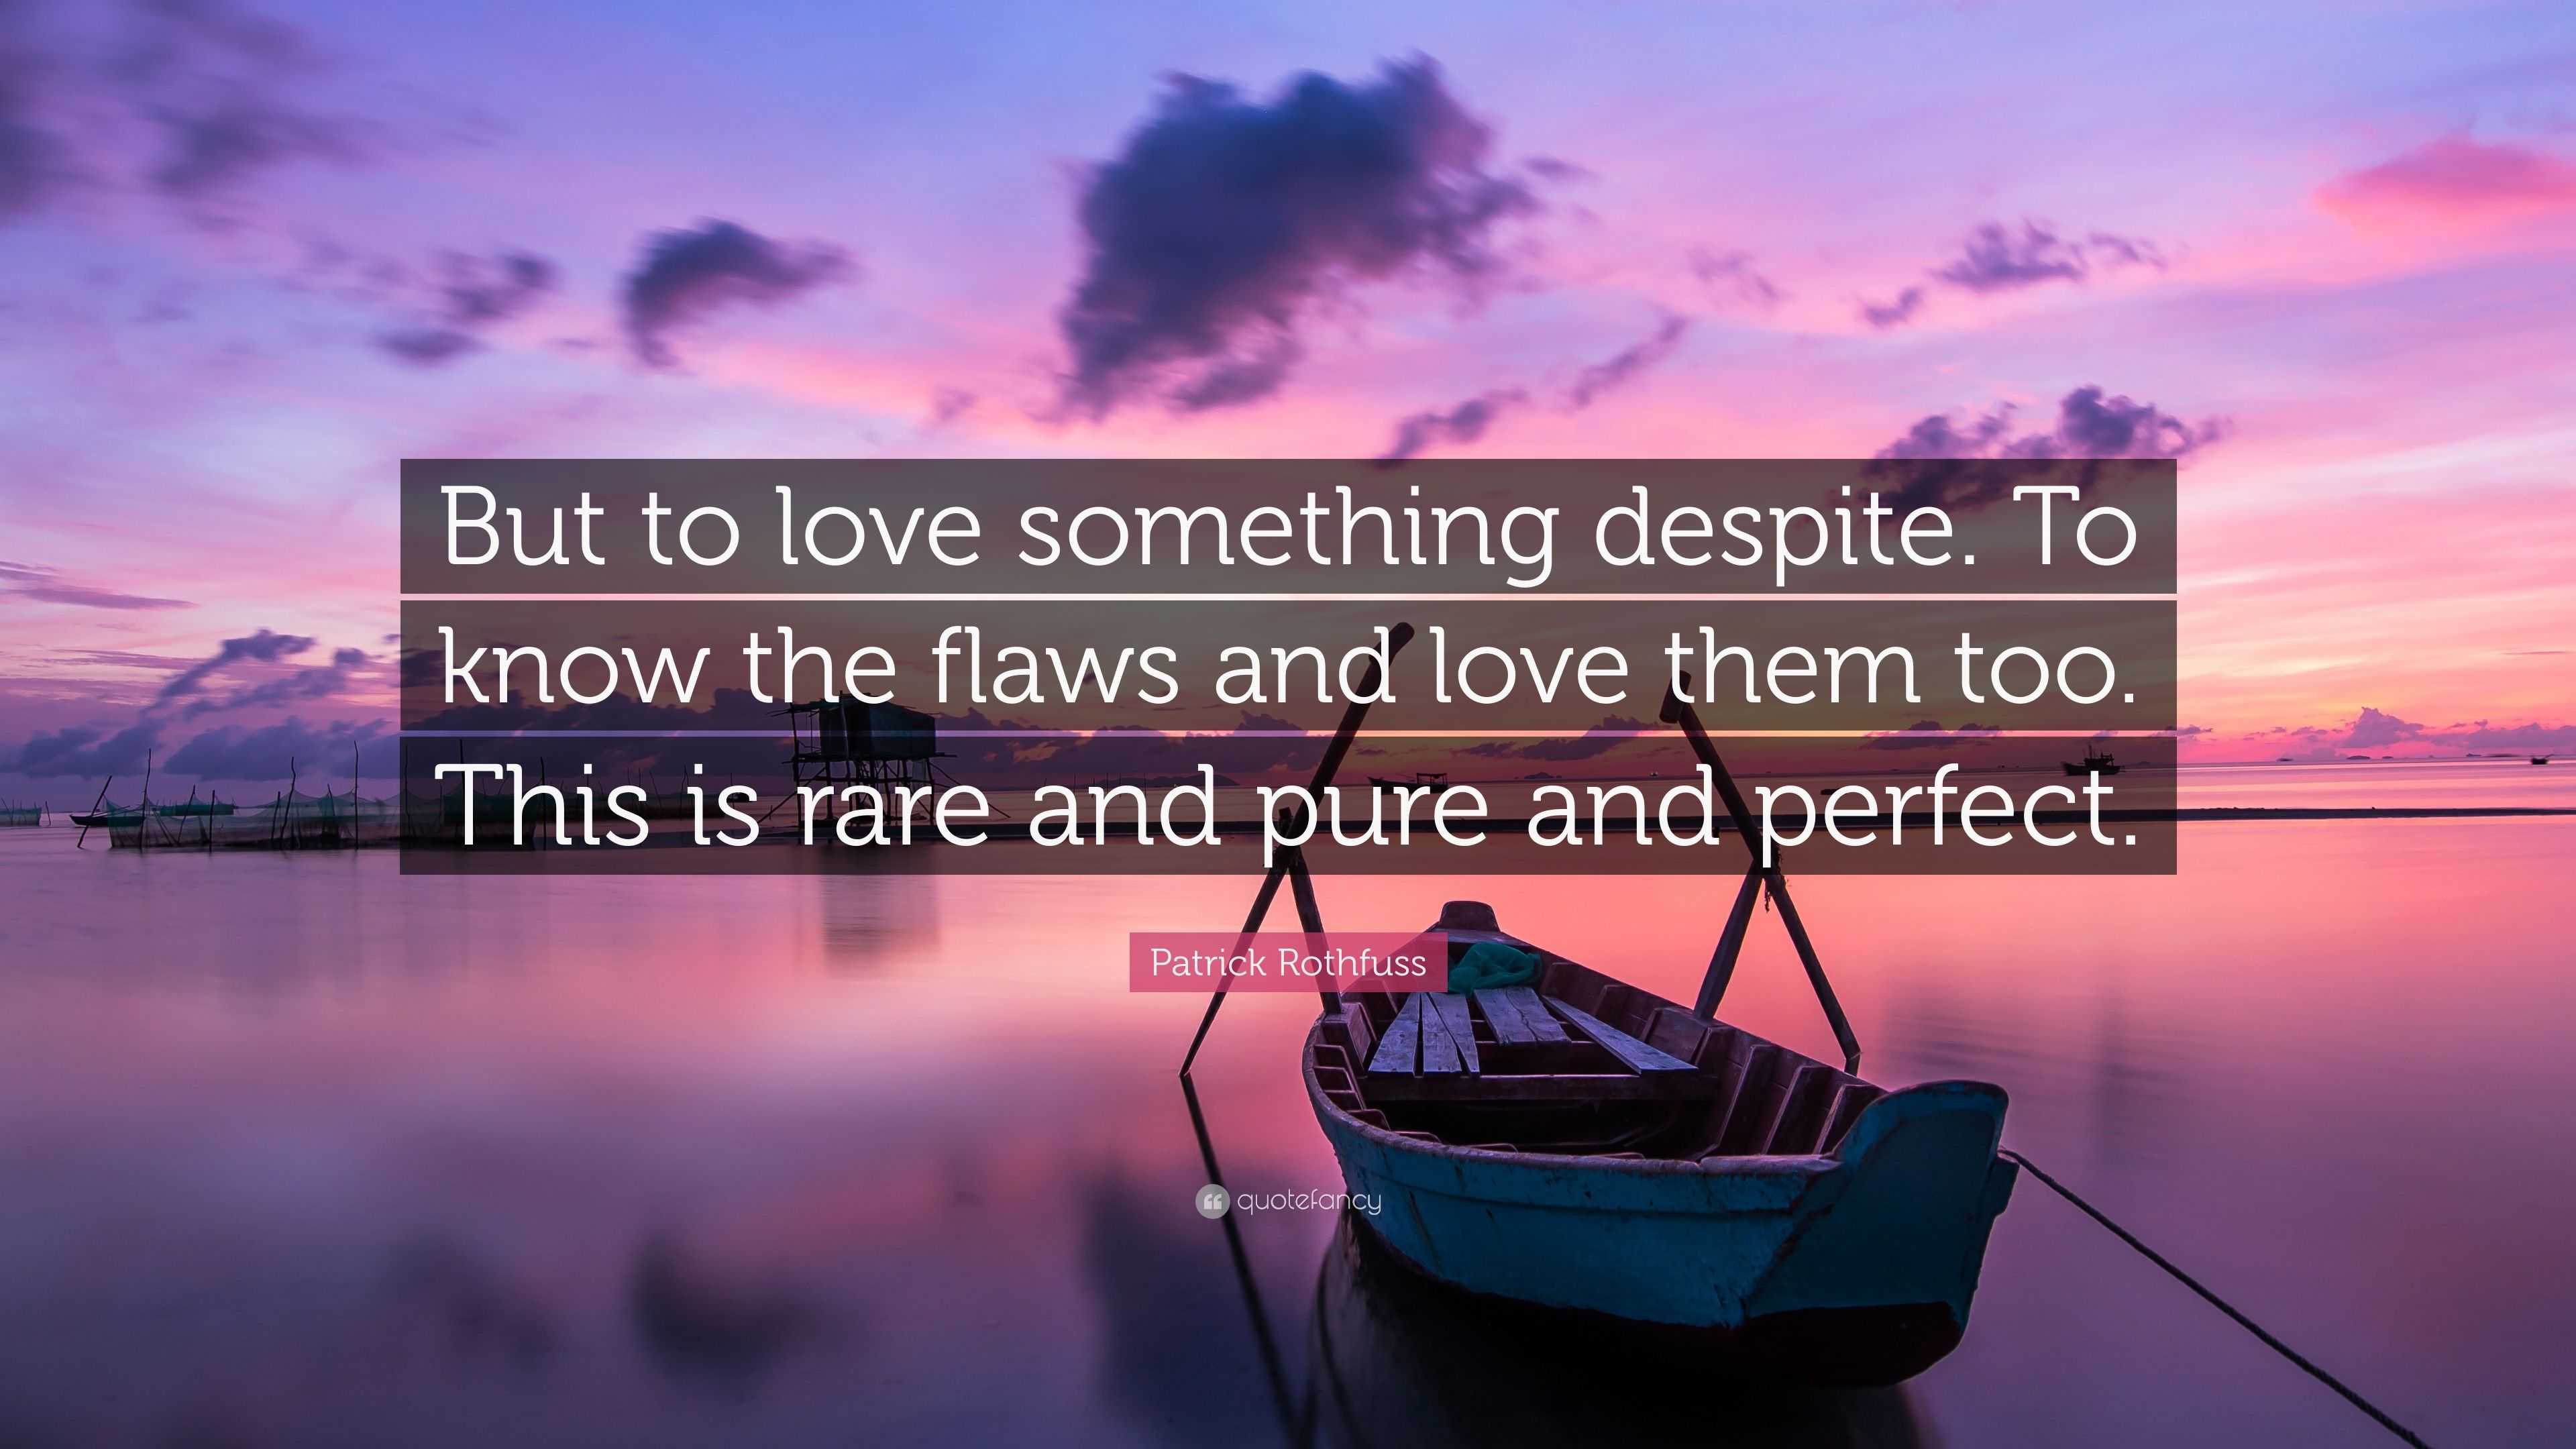 Patrick Rothfuss Quote: “But to love something despite. To ...